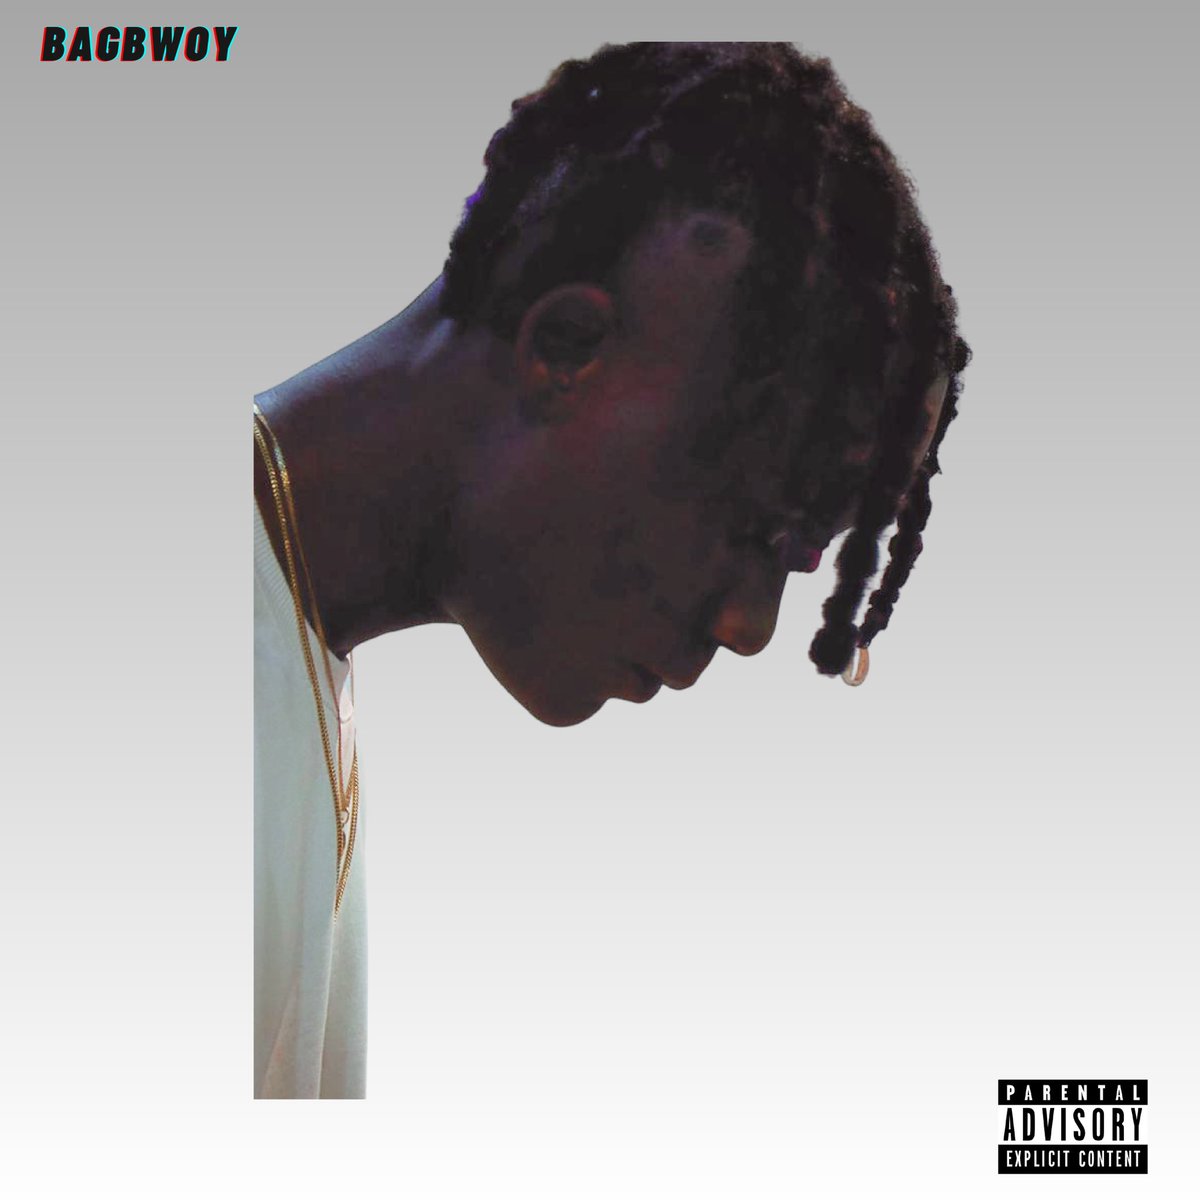 TRAP(take risk and prosper)out by BAGBWOY on all streaming platforms.     linktr.ee/Bagbwoy

#Ashes23 #CanadaGP #DrRomantic3 #FathersDay #insiders #PerfectMatchXtra #PerfectMatchXtra #Tudum2023 #9jadrill